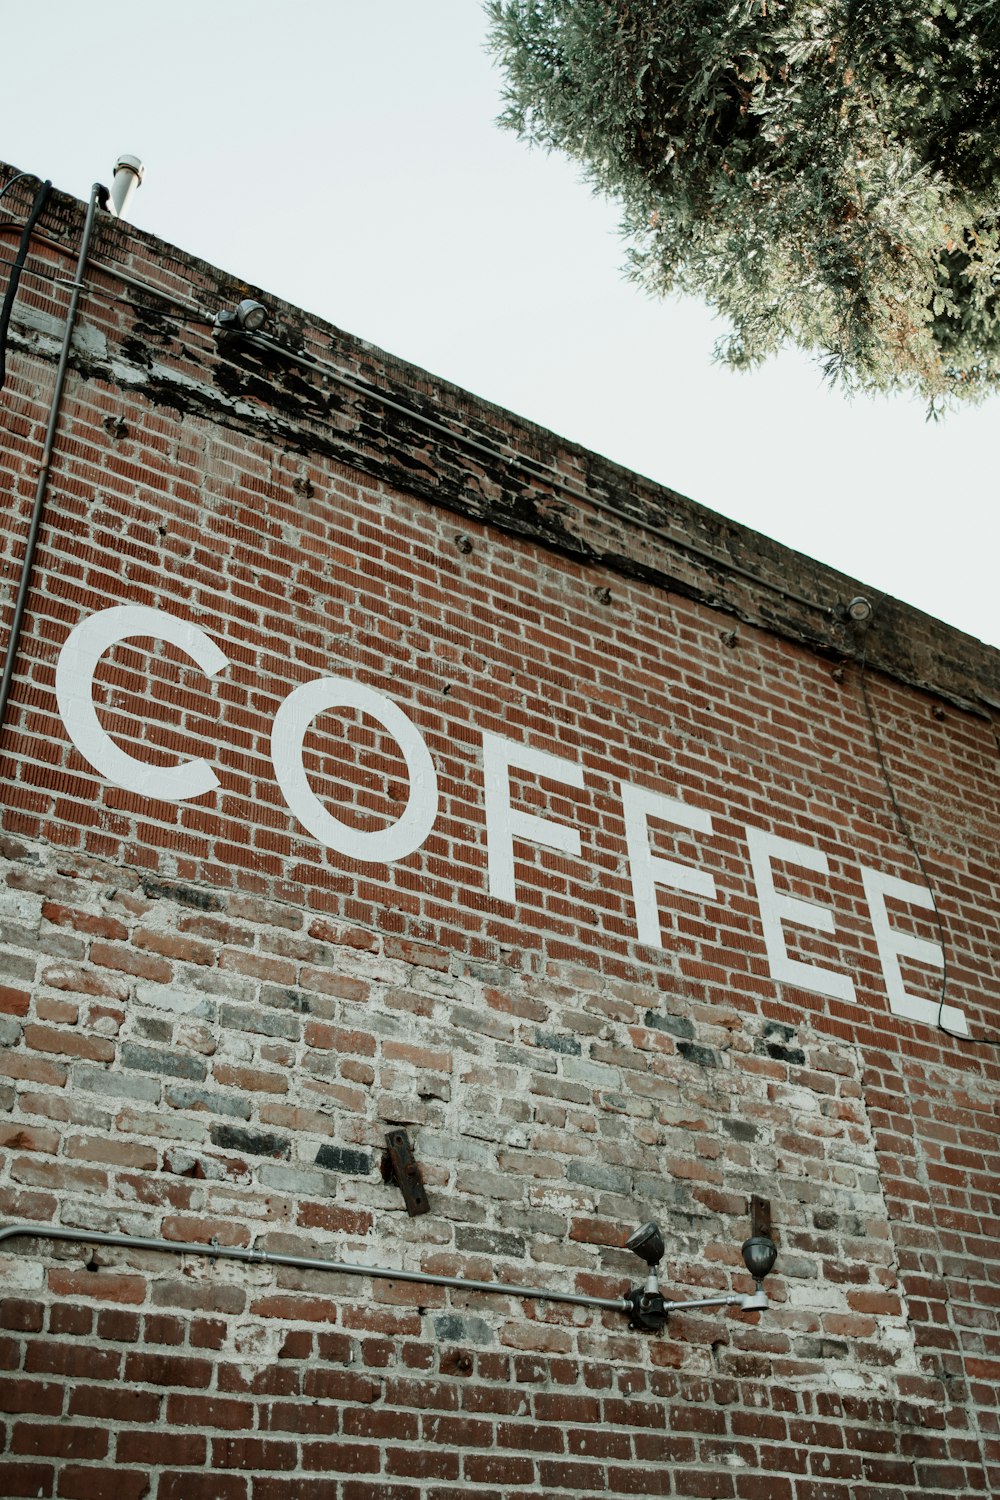 a brick wall with a sign that says coffee on it